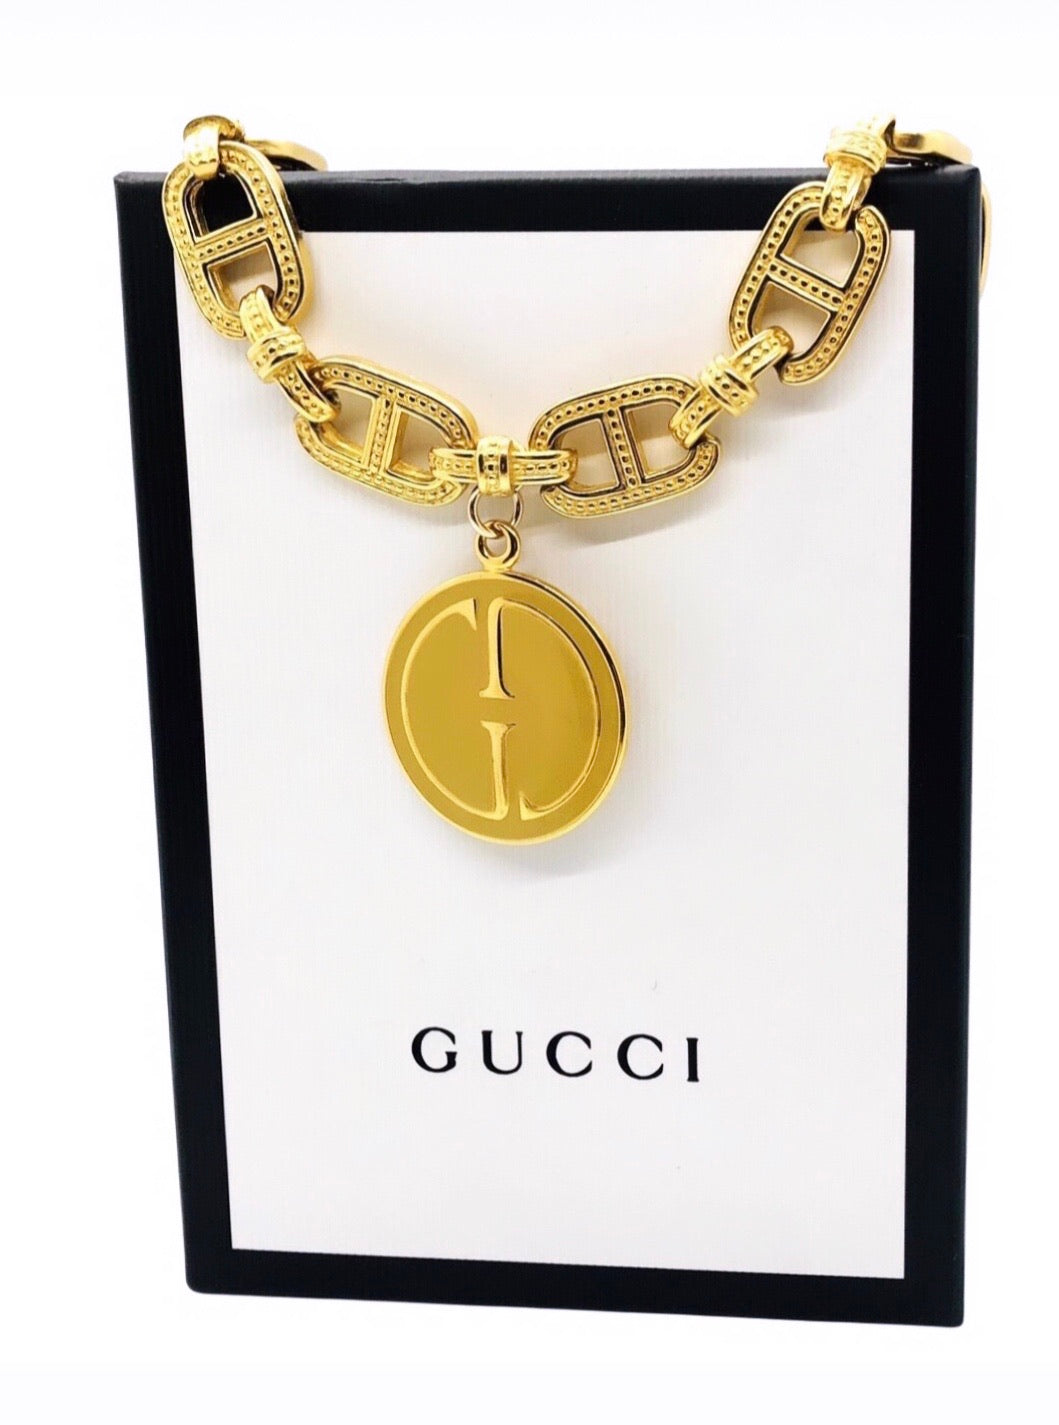 Repurposed 1990’s Gucci Mariner Link Textured Necklace